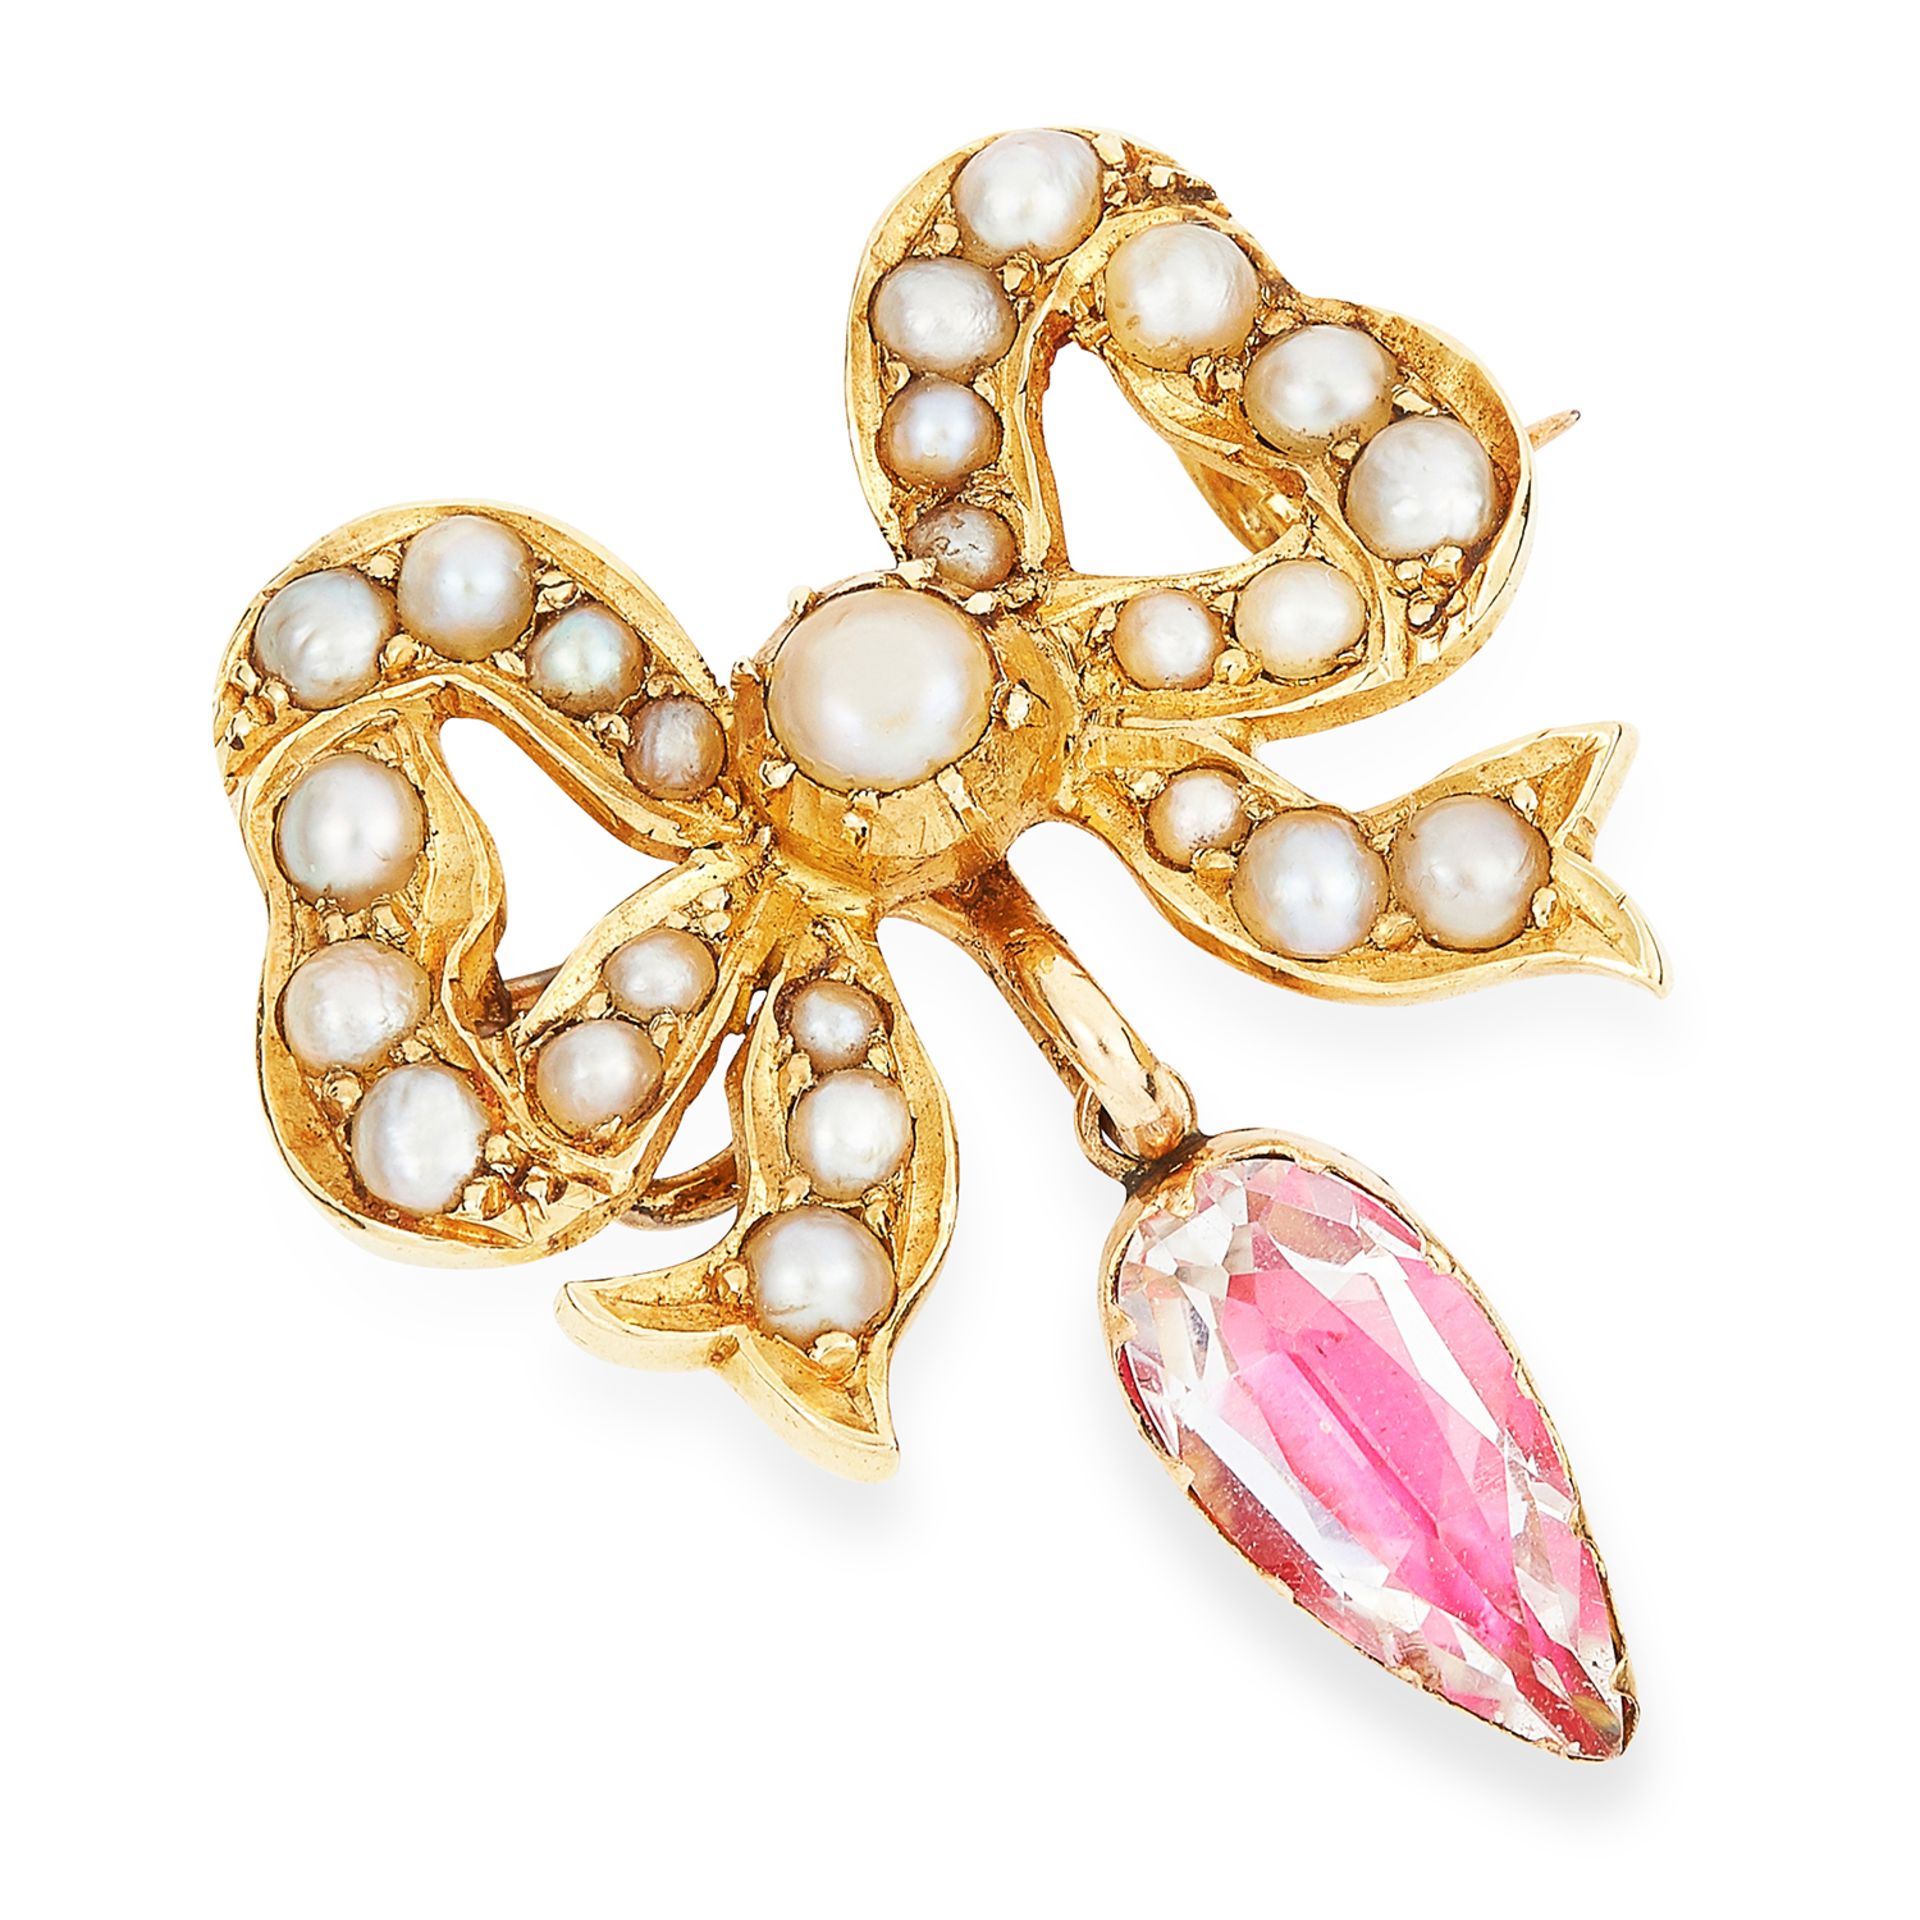 ANTIQUE PINK TOPAZ AND SEED PEARL BOW BROOCH in high carat yellow gold, set with seed pearls and